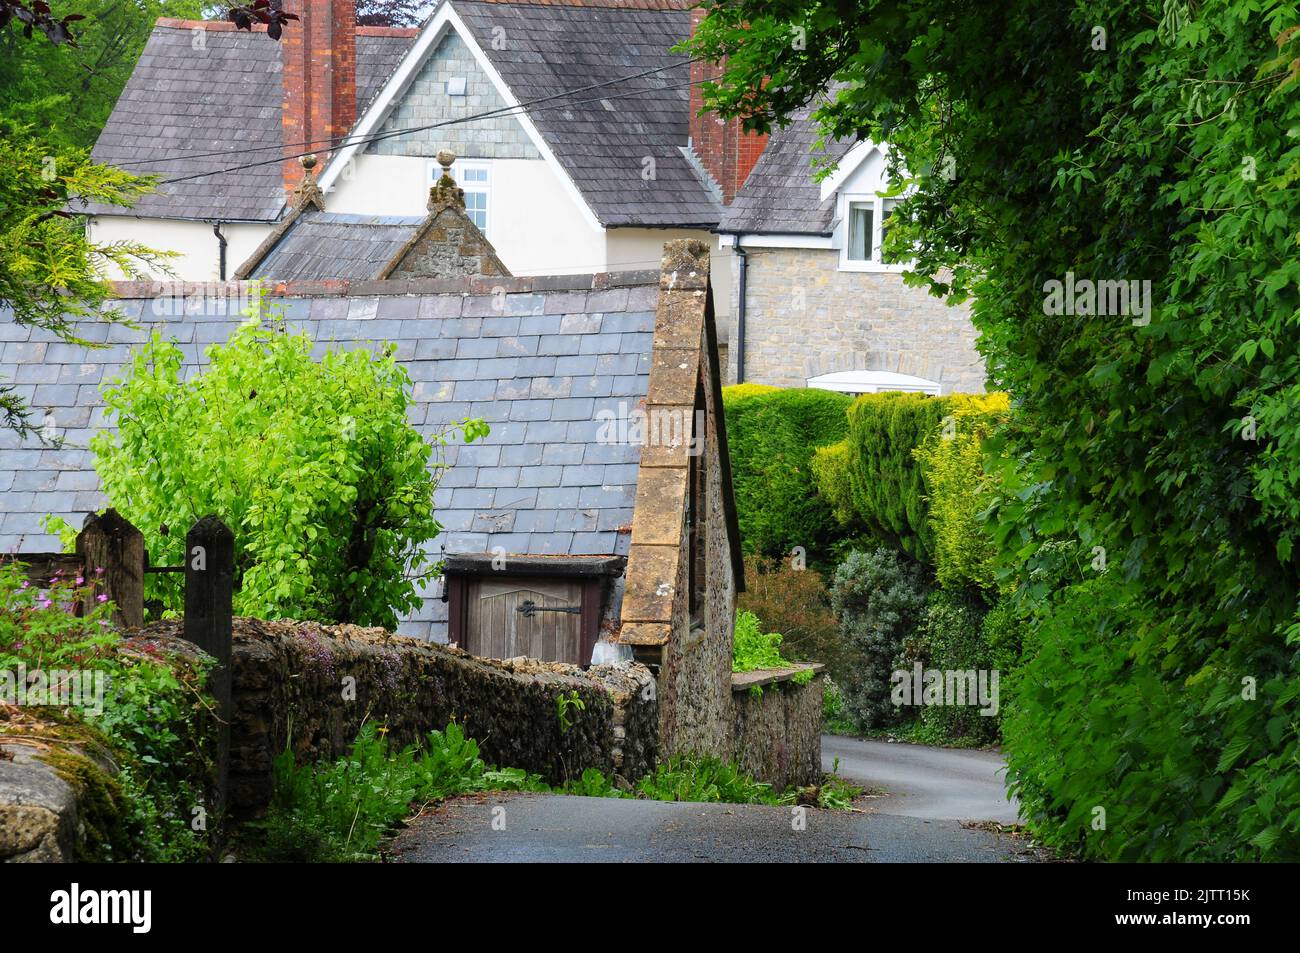 The rural village of Chedington in West Dorset, UK Stock Photo